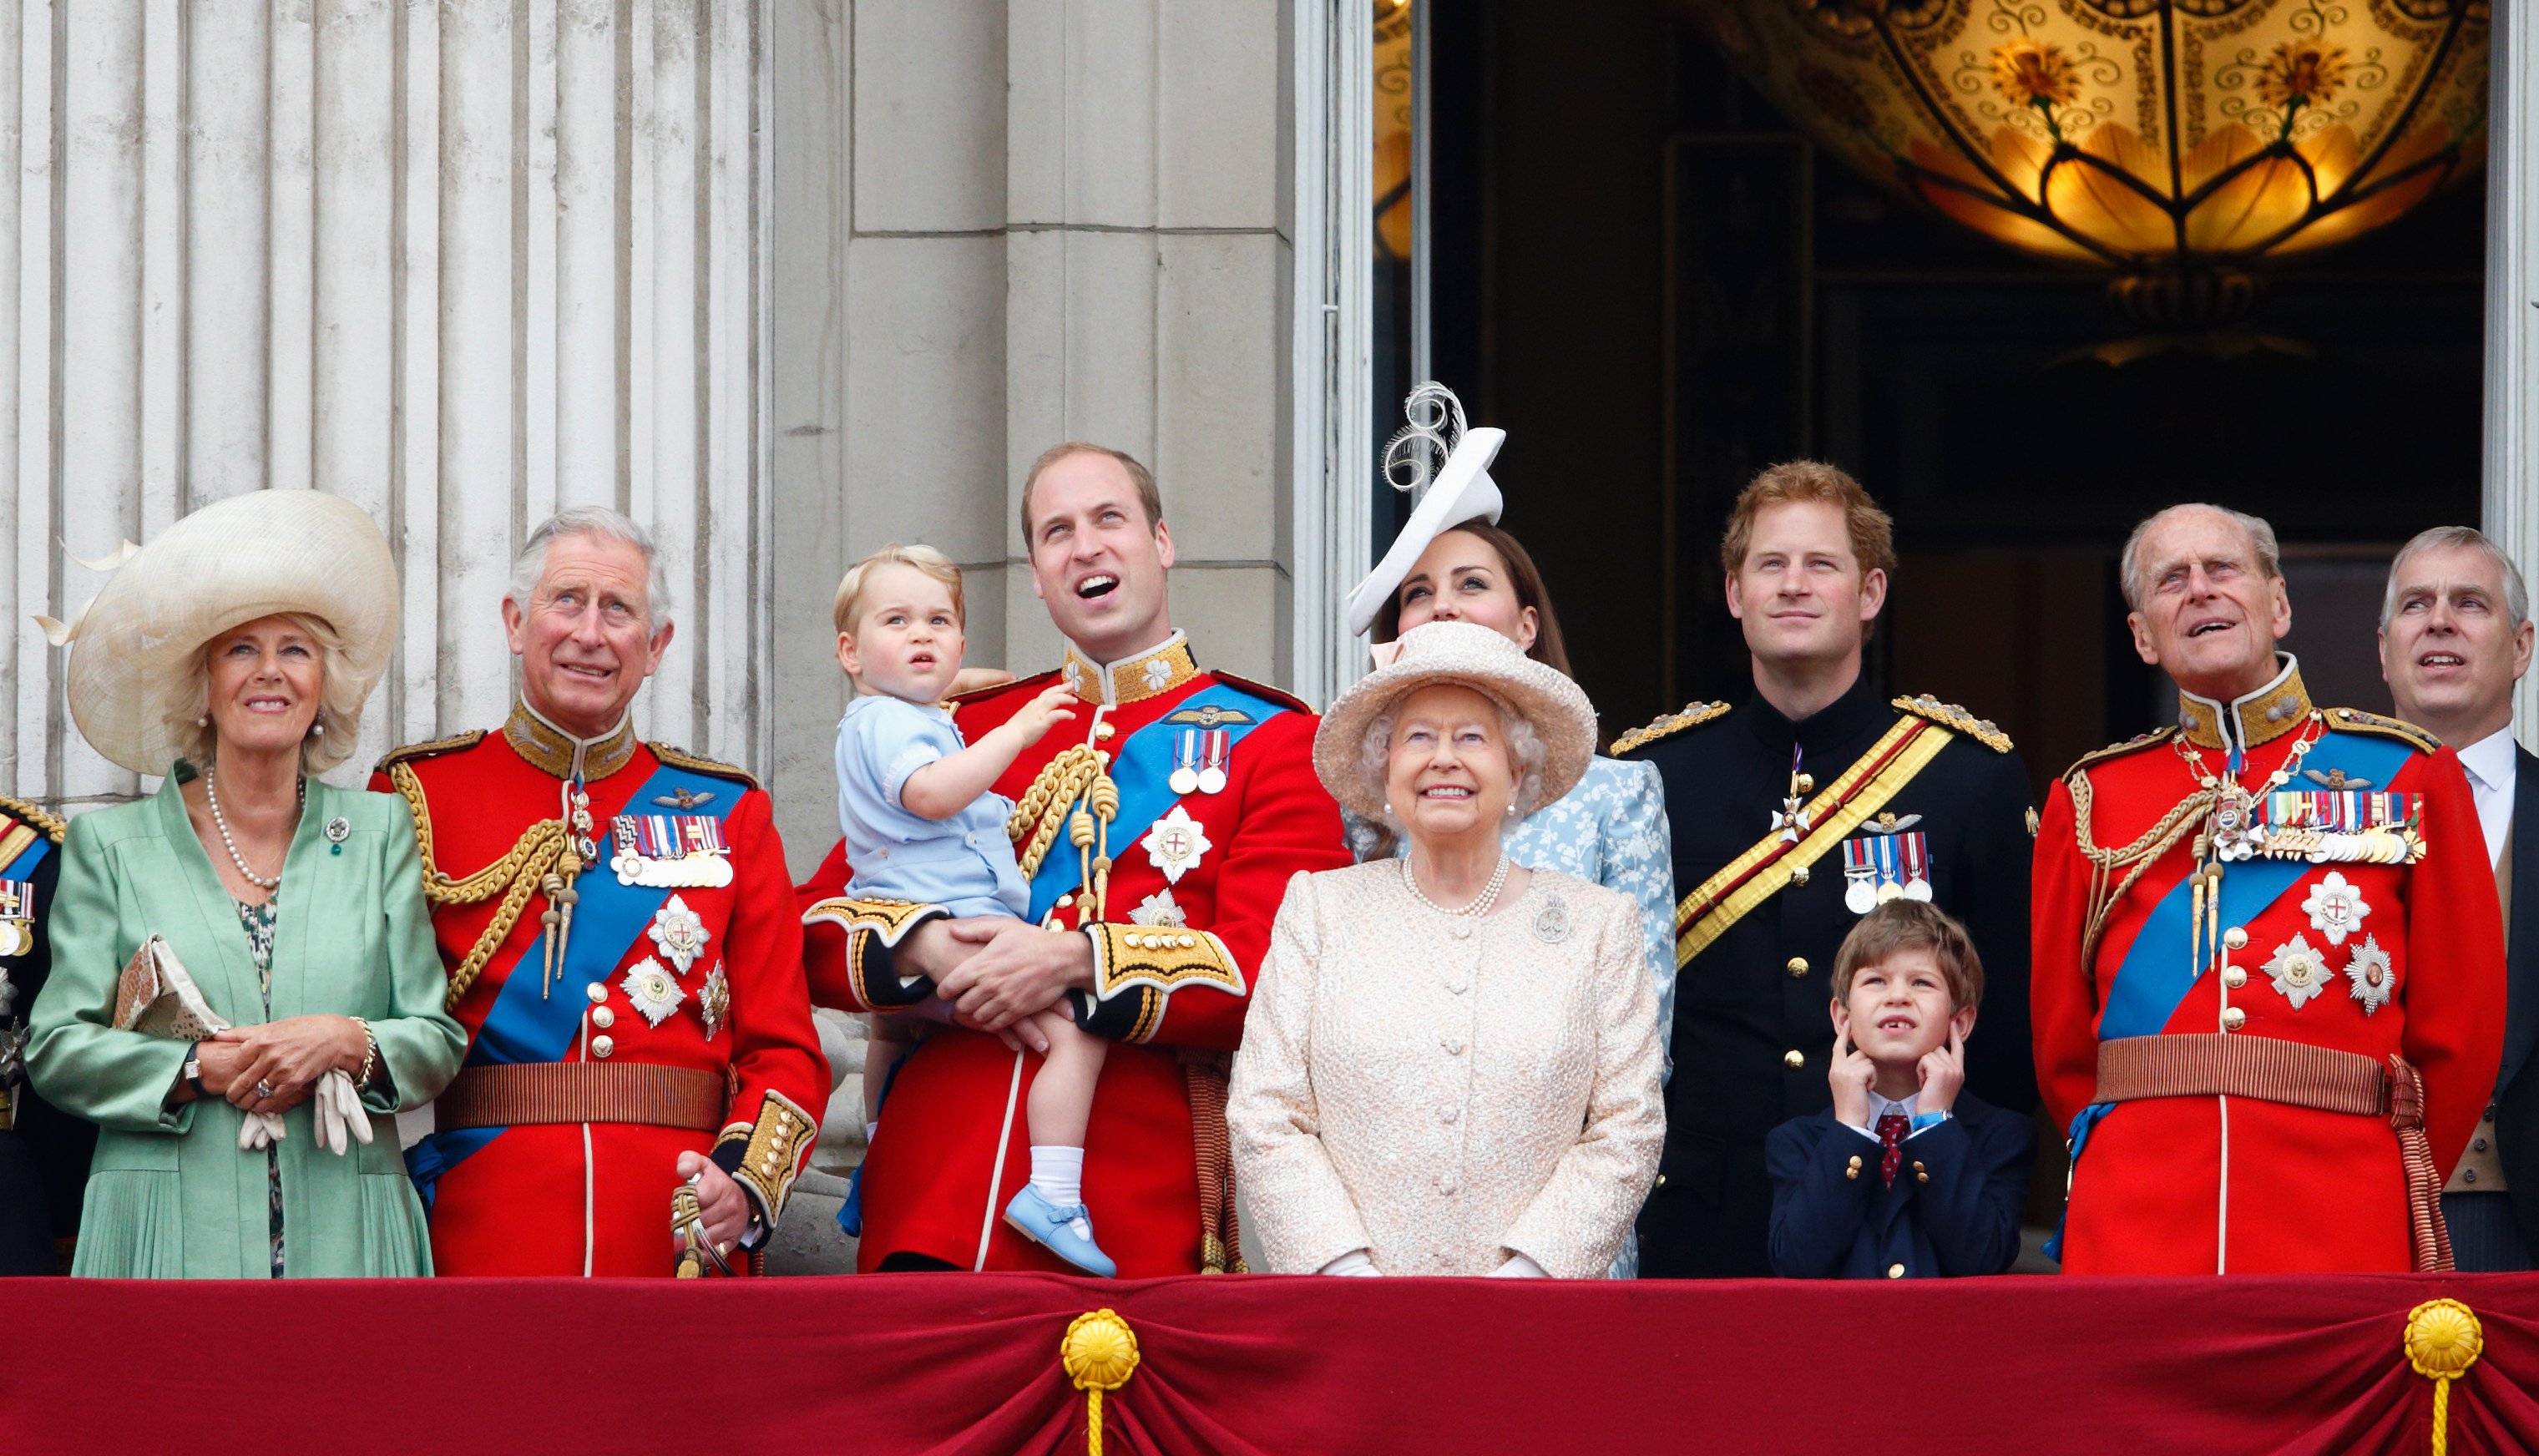 Camilla, the Queen Consort, King Charle, Prince William, Prince George, Catherine, the Duchess of Cambridge, Queen Elizabeth II, Prince Harry, James, Viscount Severn and Prince Philip, Duke of Edinburgh, standing on the balcony of Buckingham Palace during Trooping the Color on June 13, 2015 in London, England.  |  Source: Getty Images